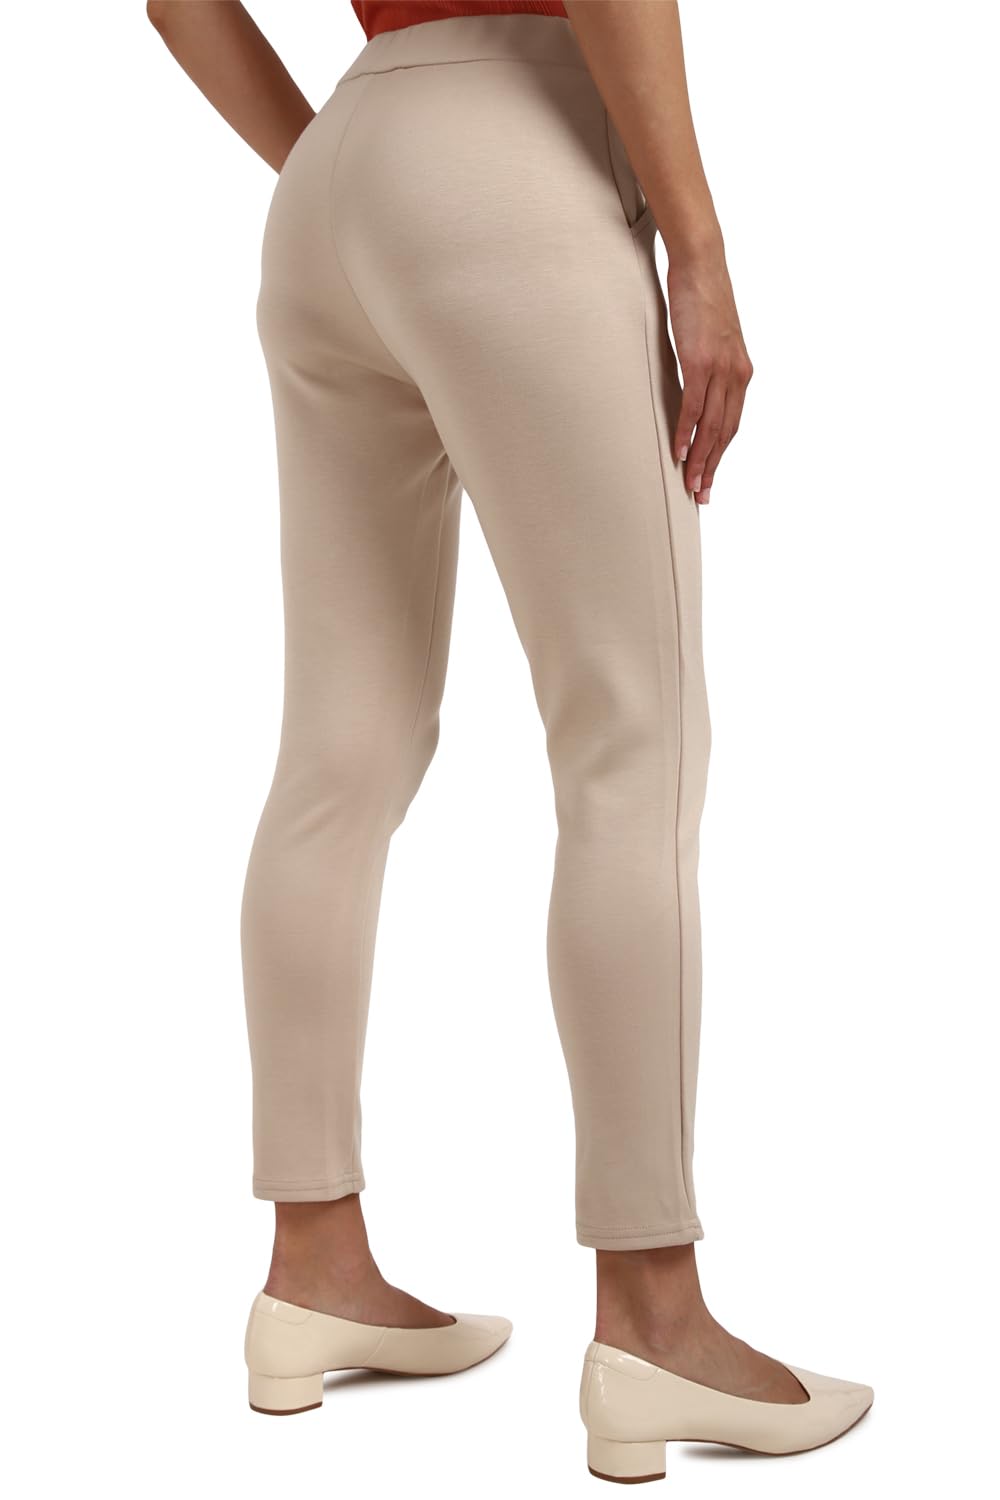 Allen Solly Trousers - Shop Amazon.in and Ship to Sydney • ShoppRe